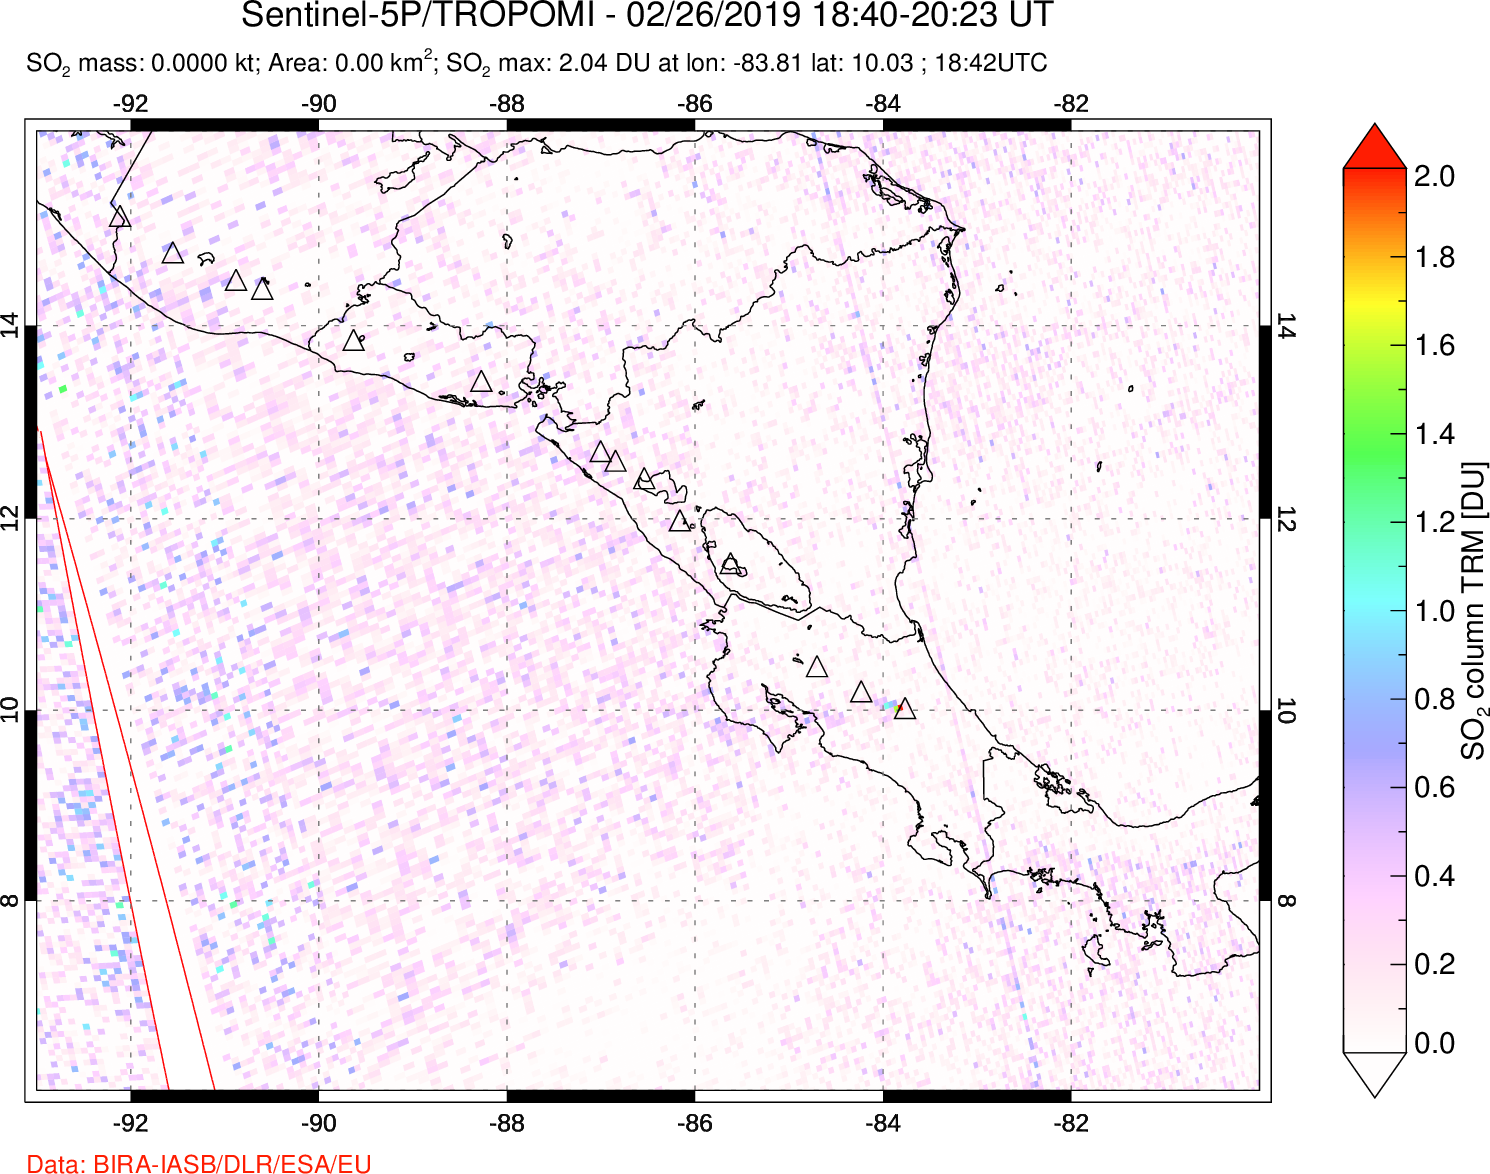 A sulfur dioxide image over Central America on Feb 26, 2019.